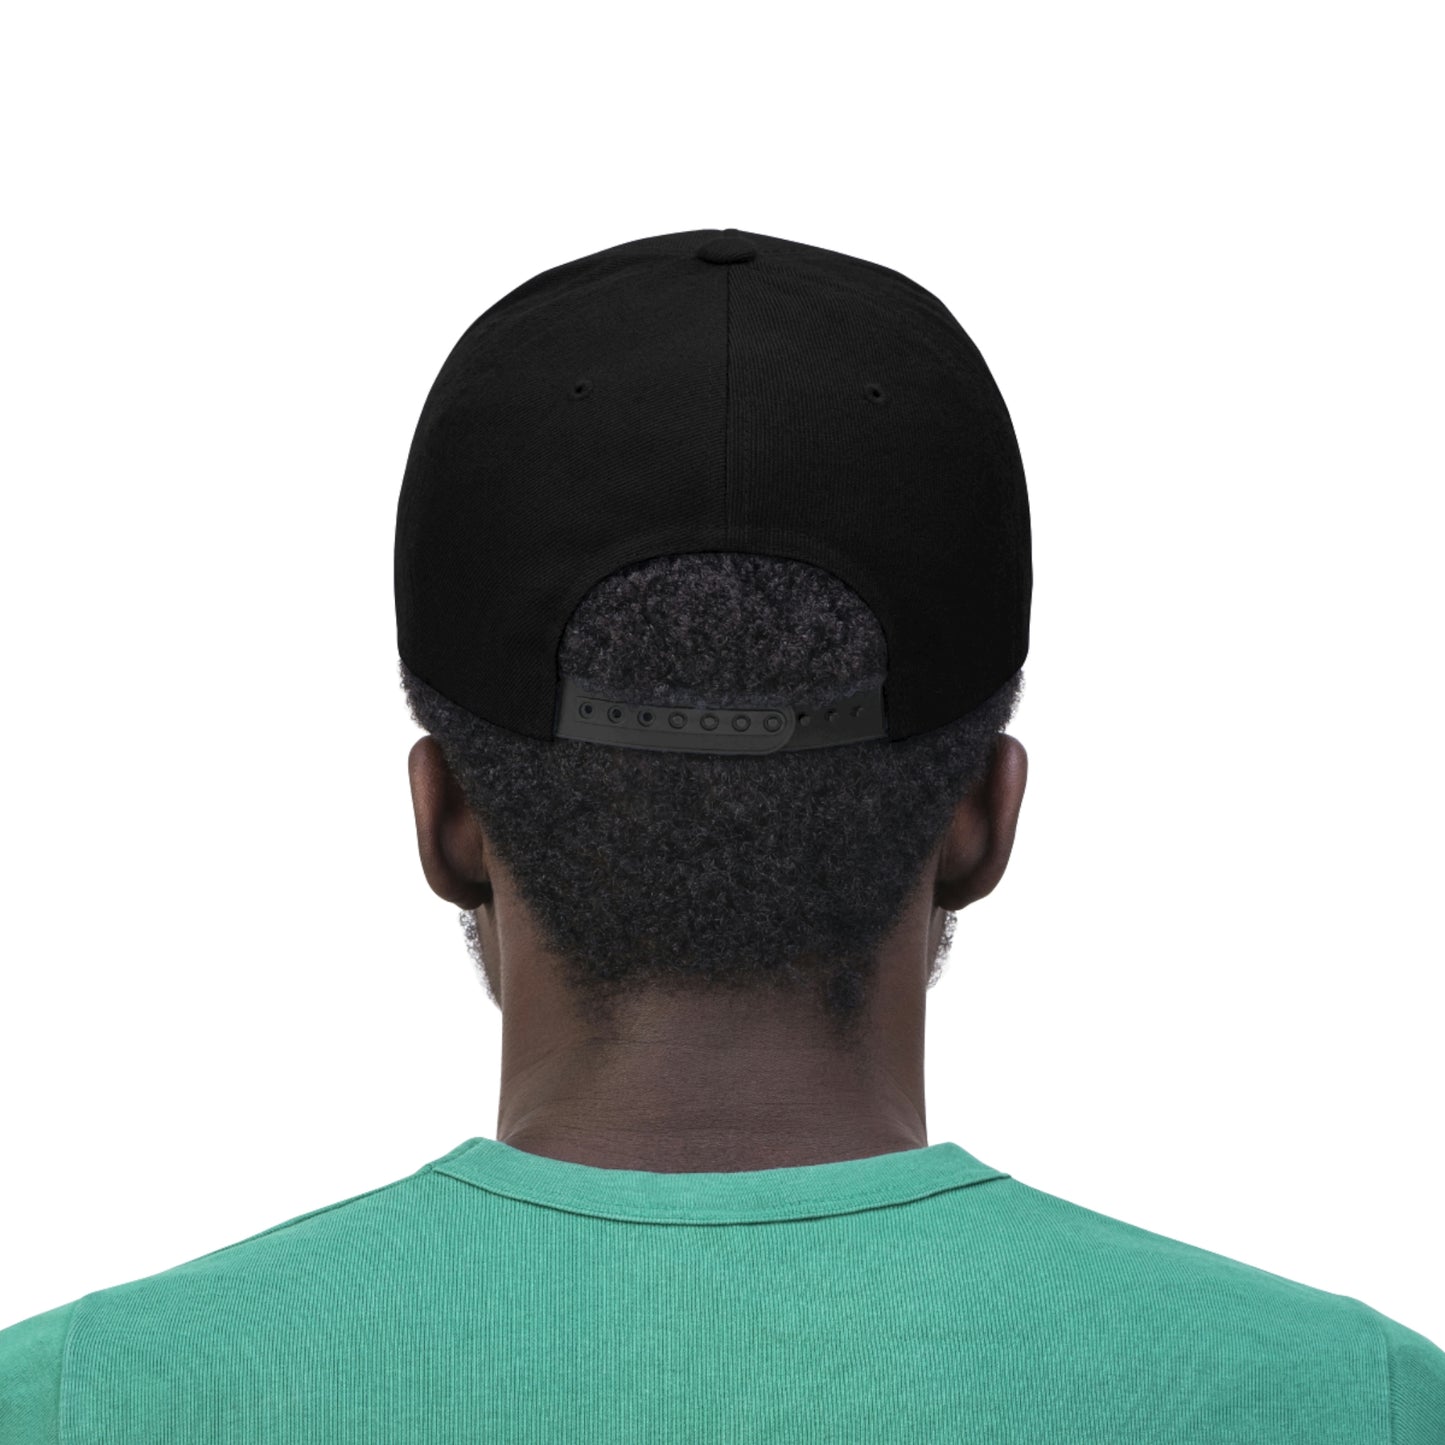 The back of the Warm Cannabis Paradise Snapback Hat in the black on black color scheme